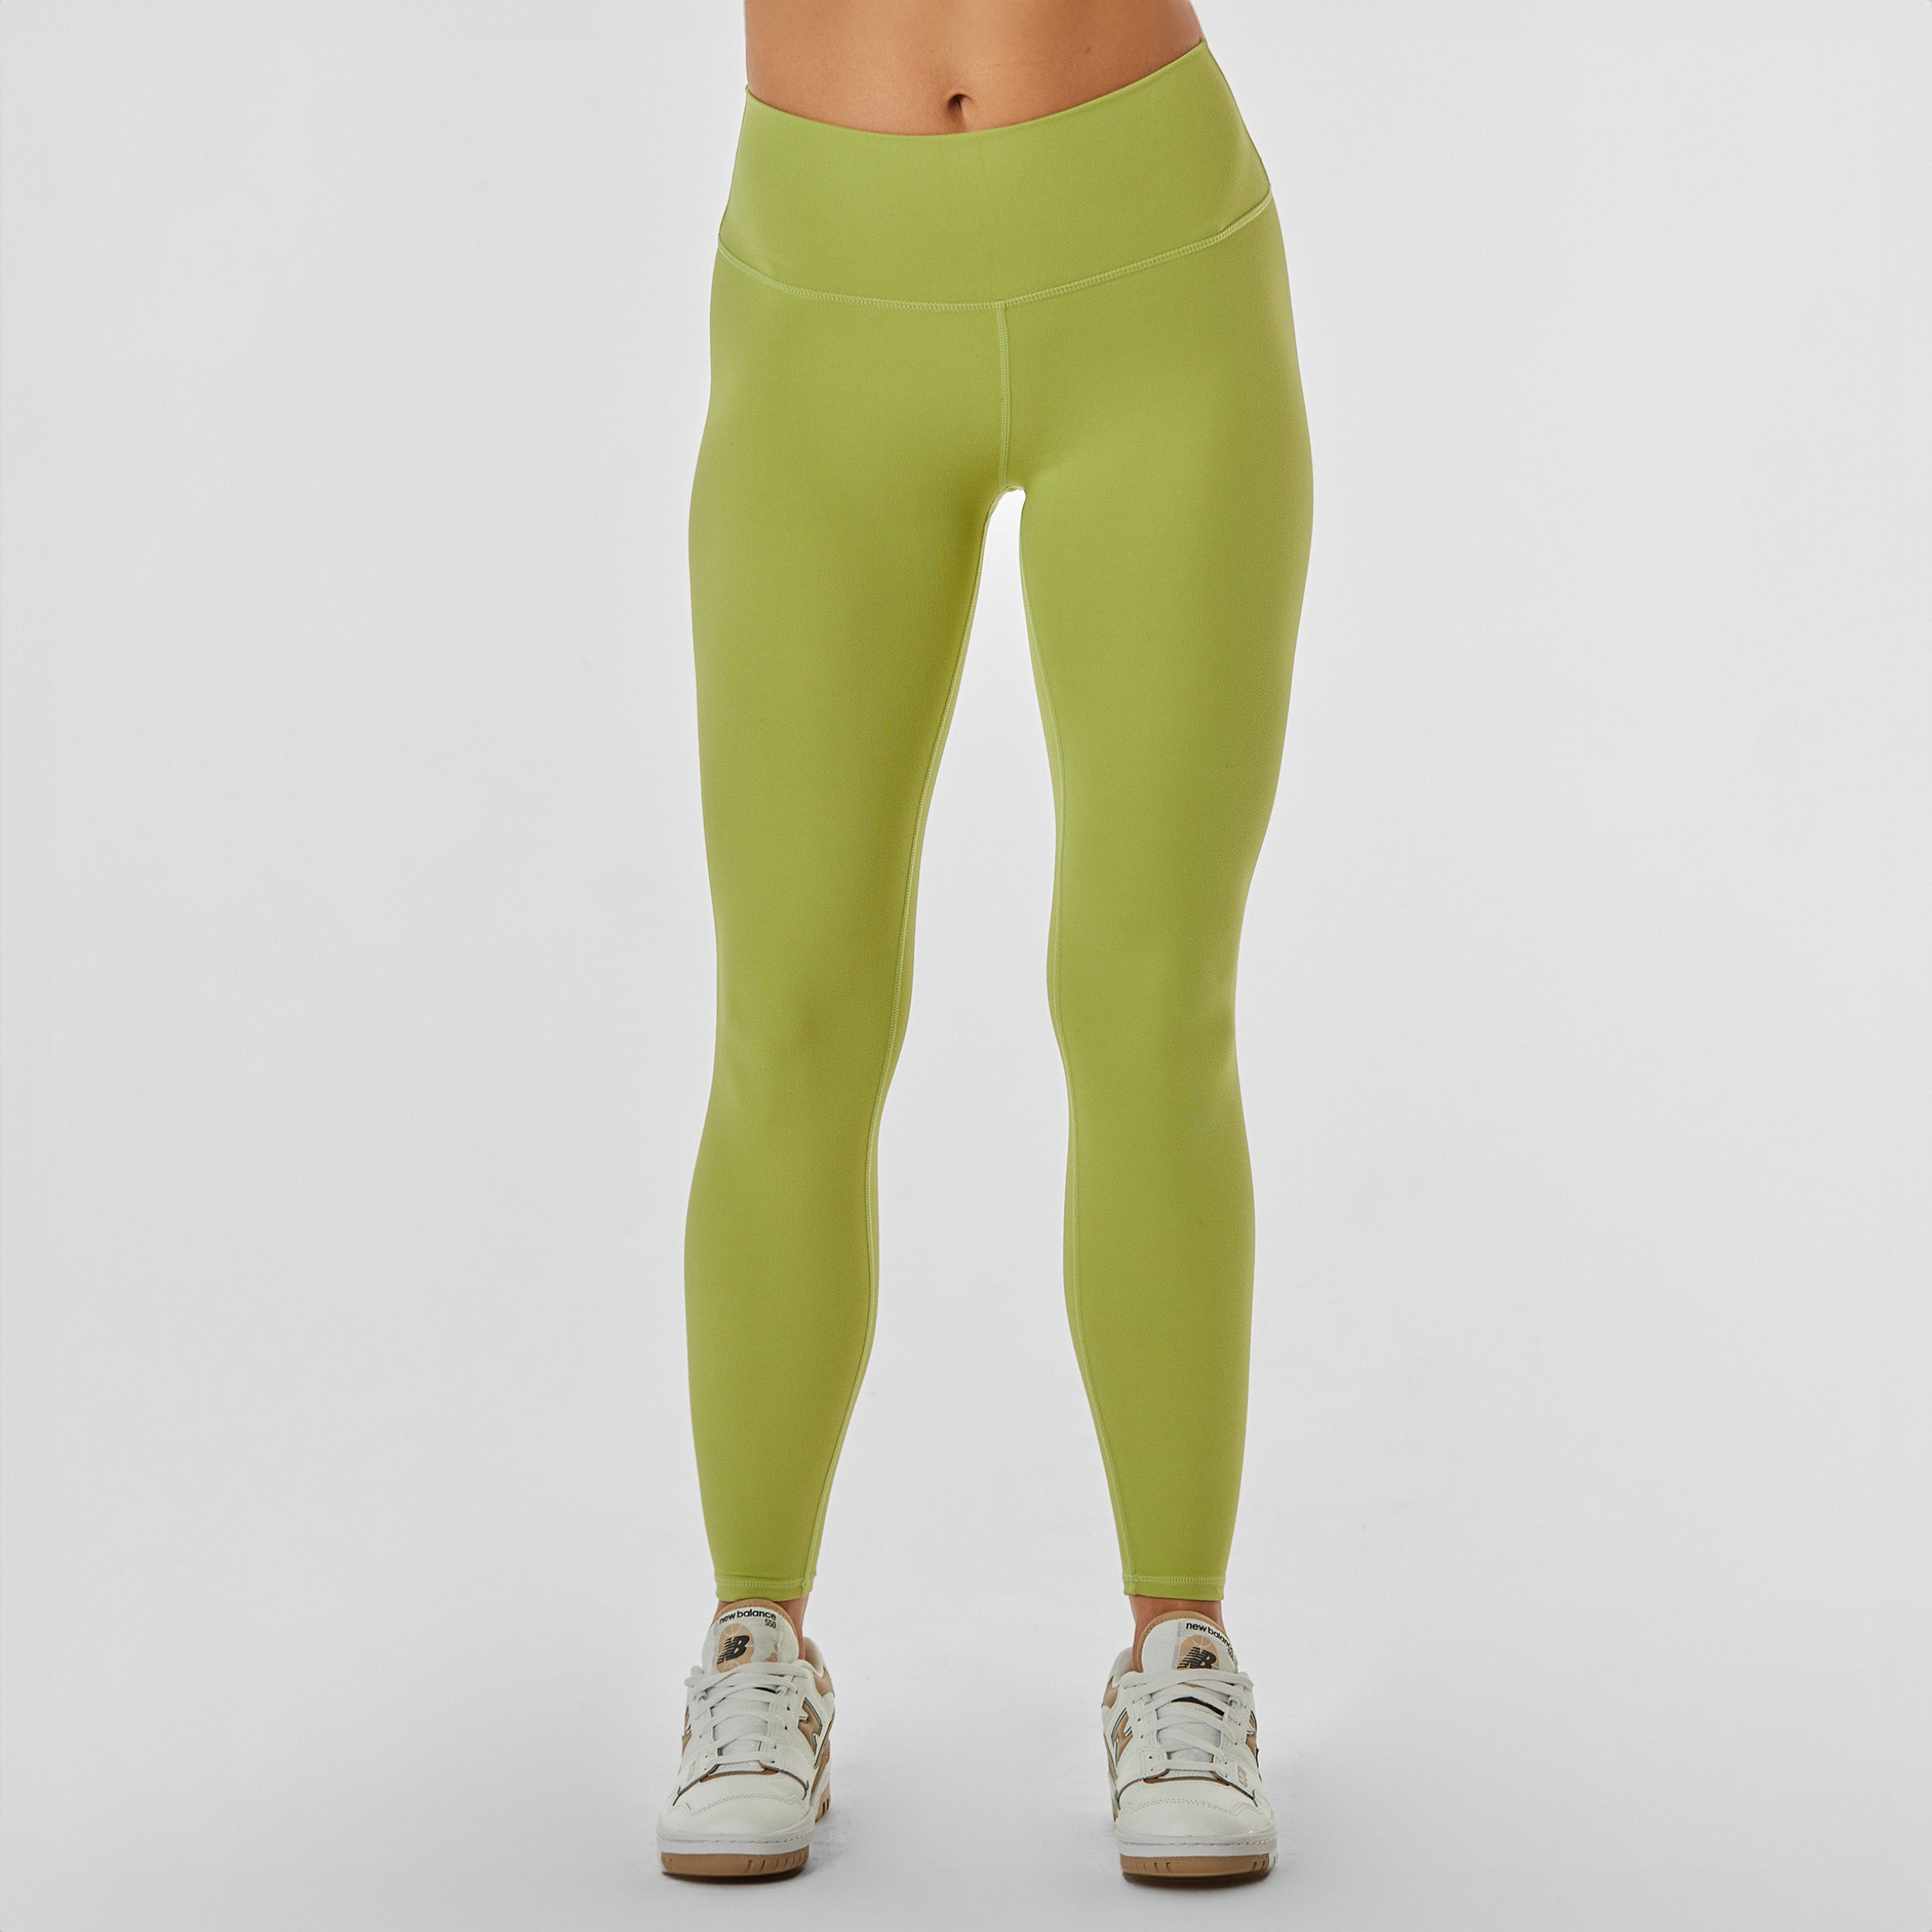 Front view of woman wearing sculpting and flattering light green legging